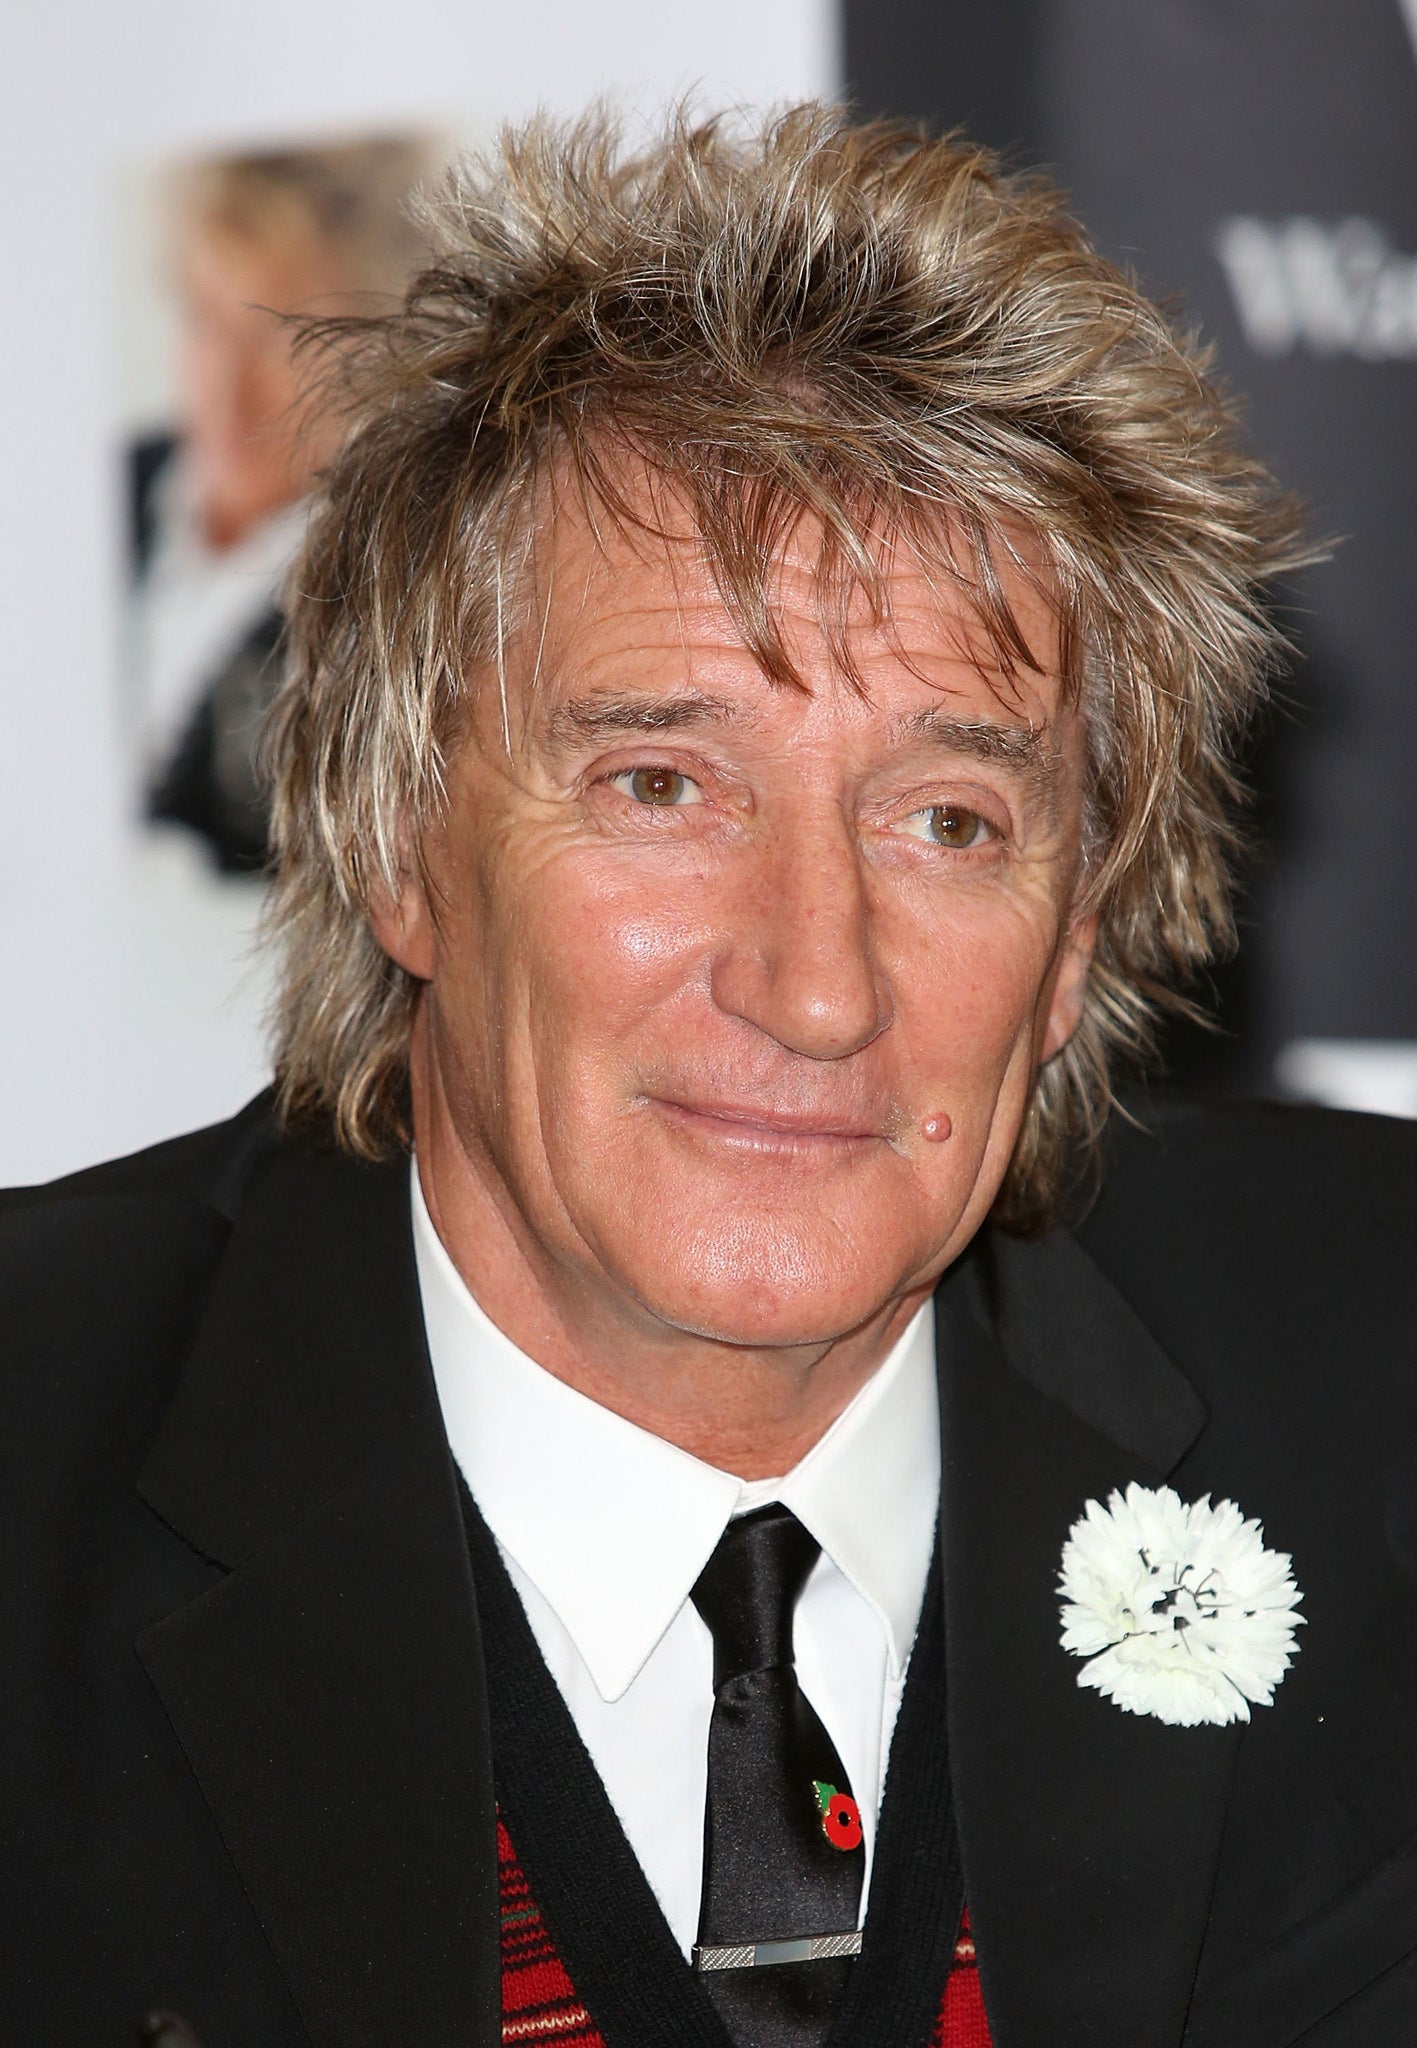 Rod Stewart makes a plea for his long-lost love on new album Time